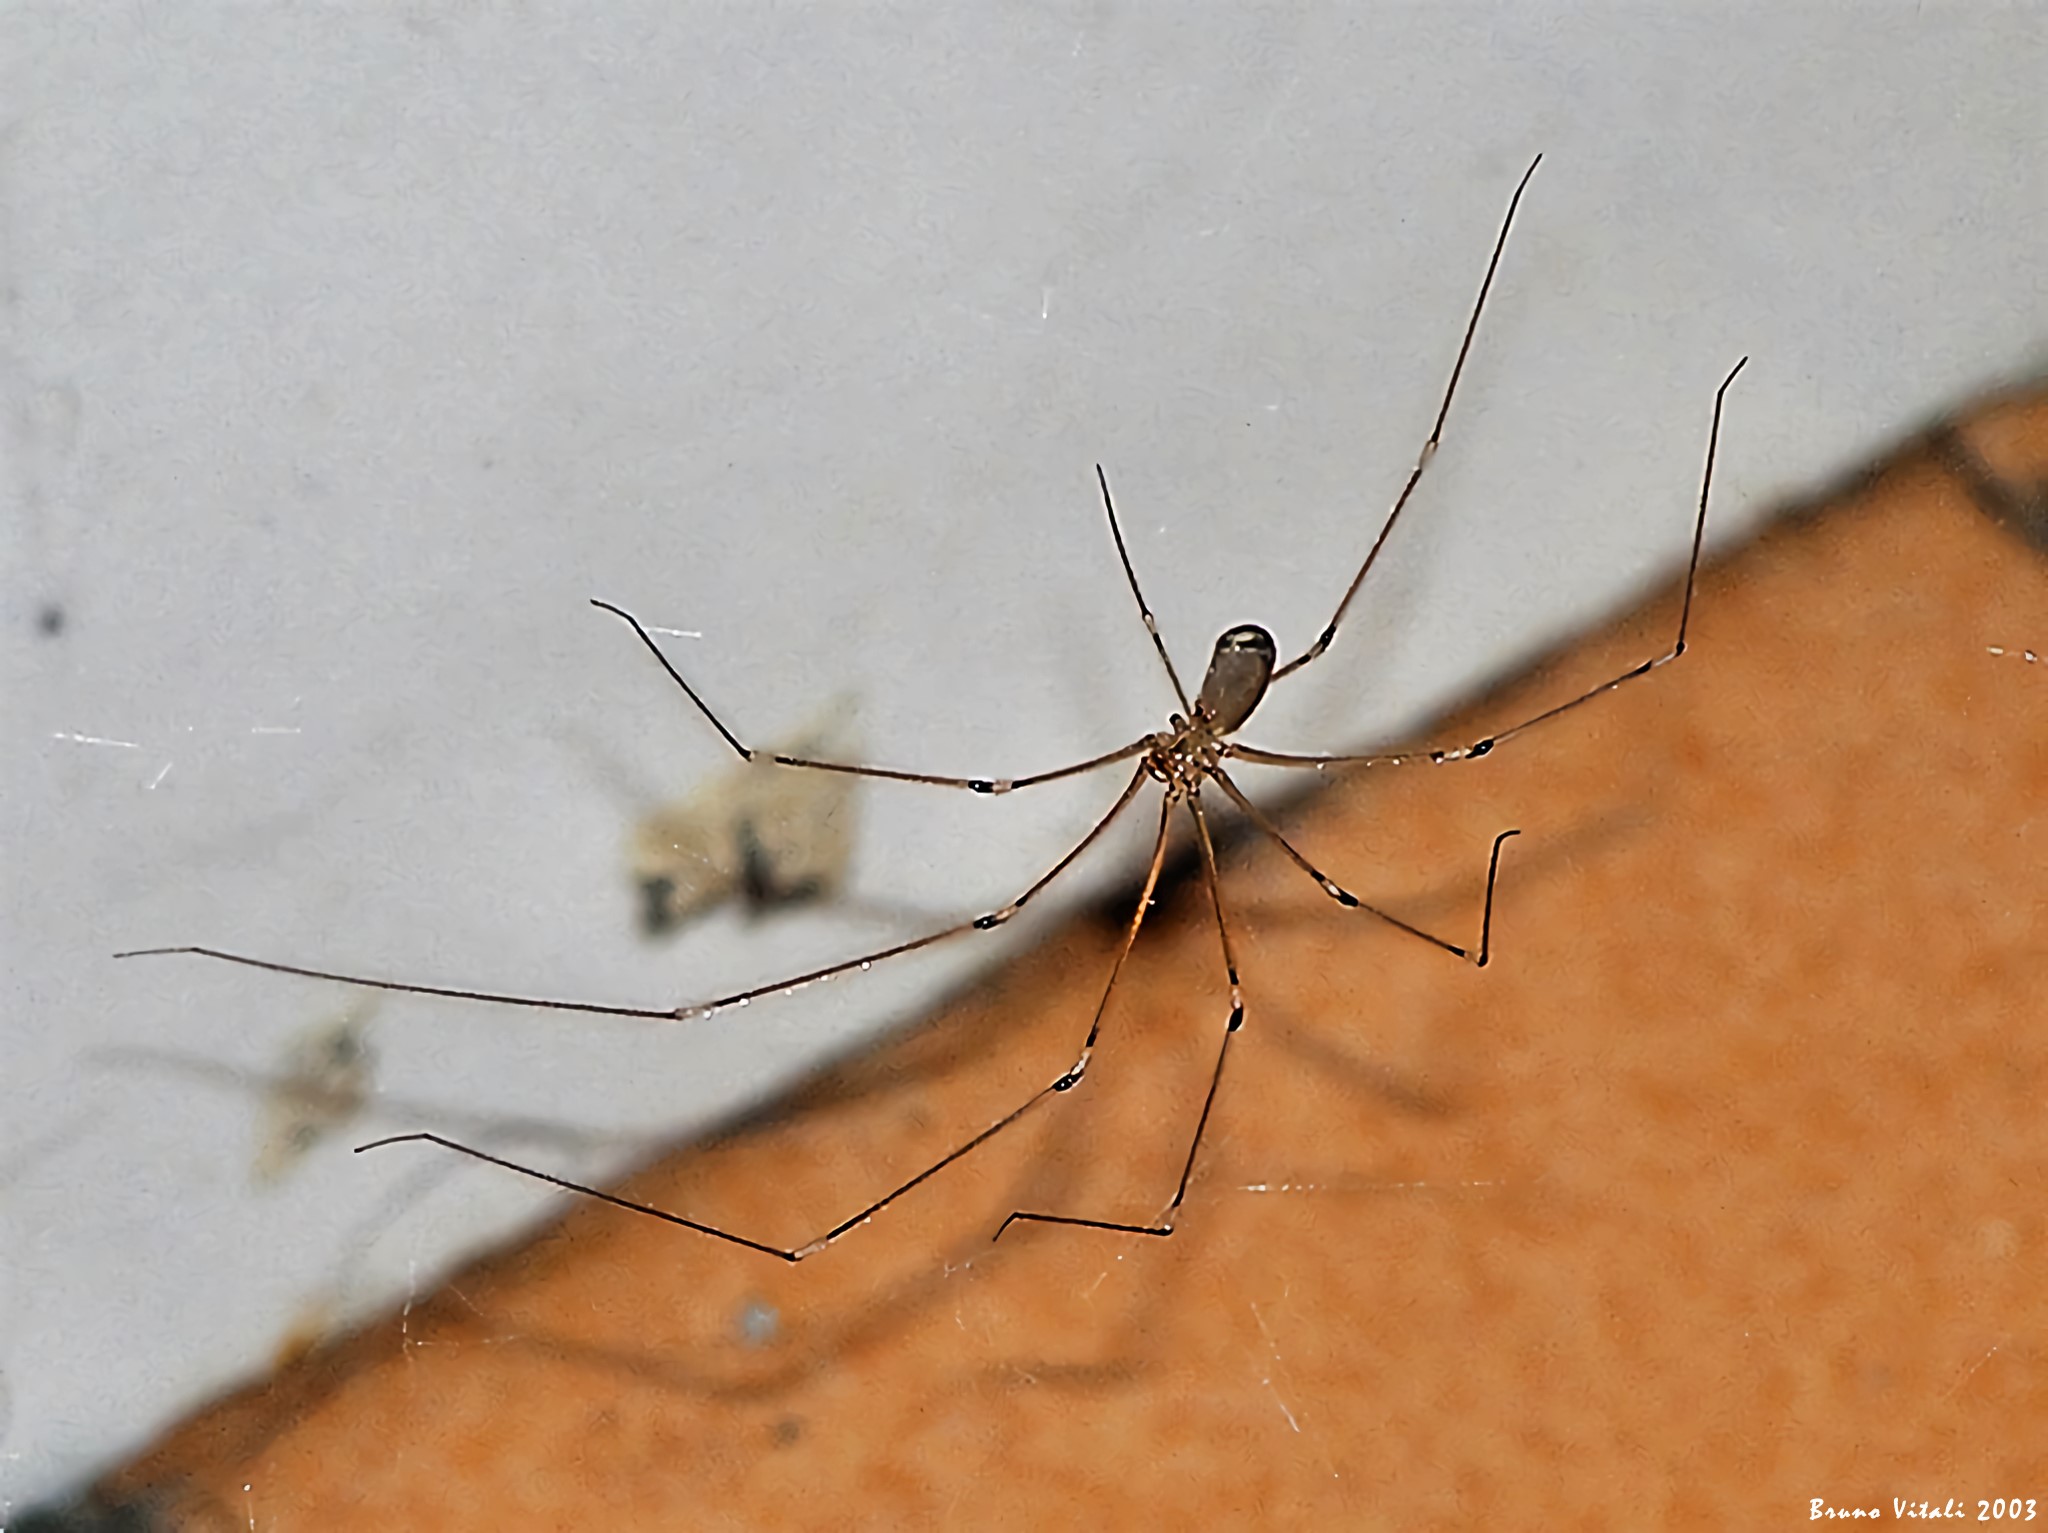 Dancing Spider (Pholcus phalangioides)...